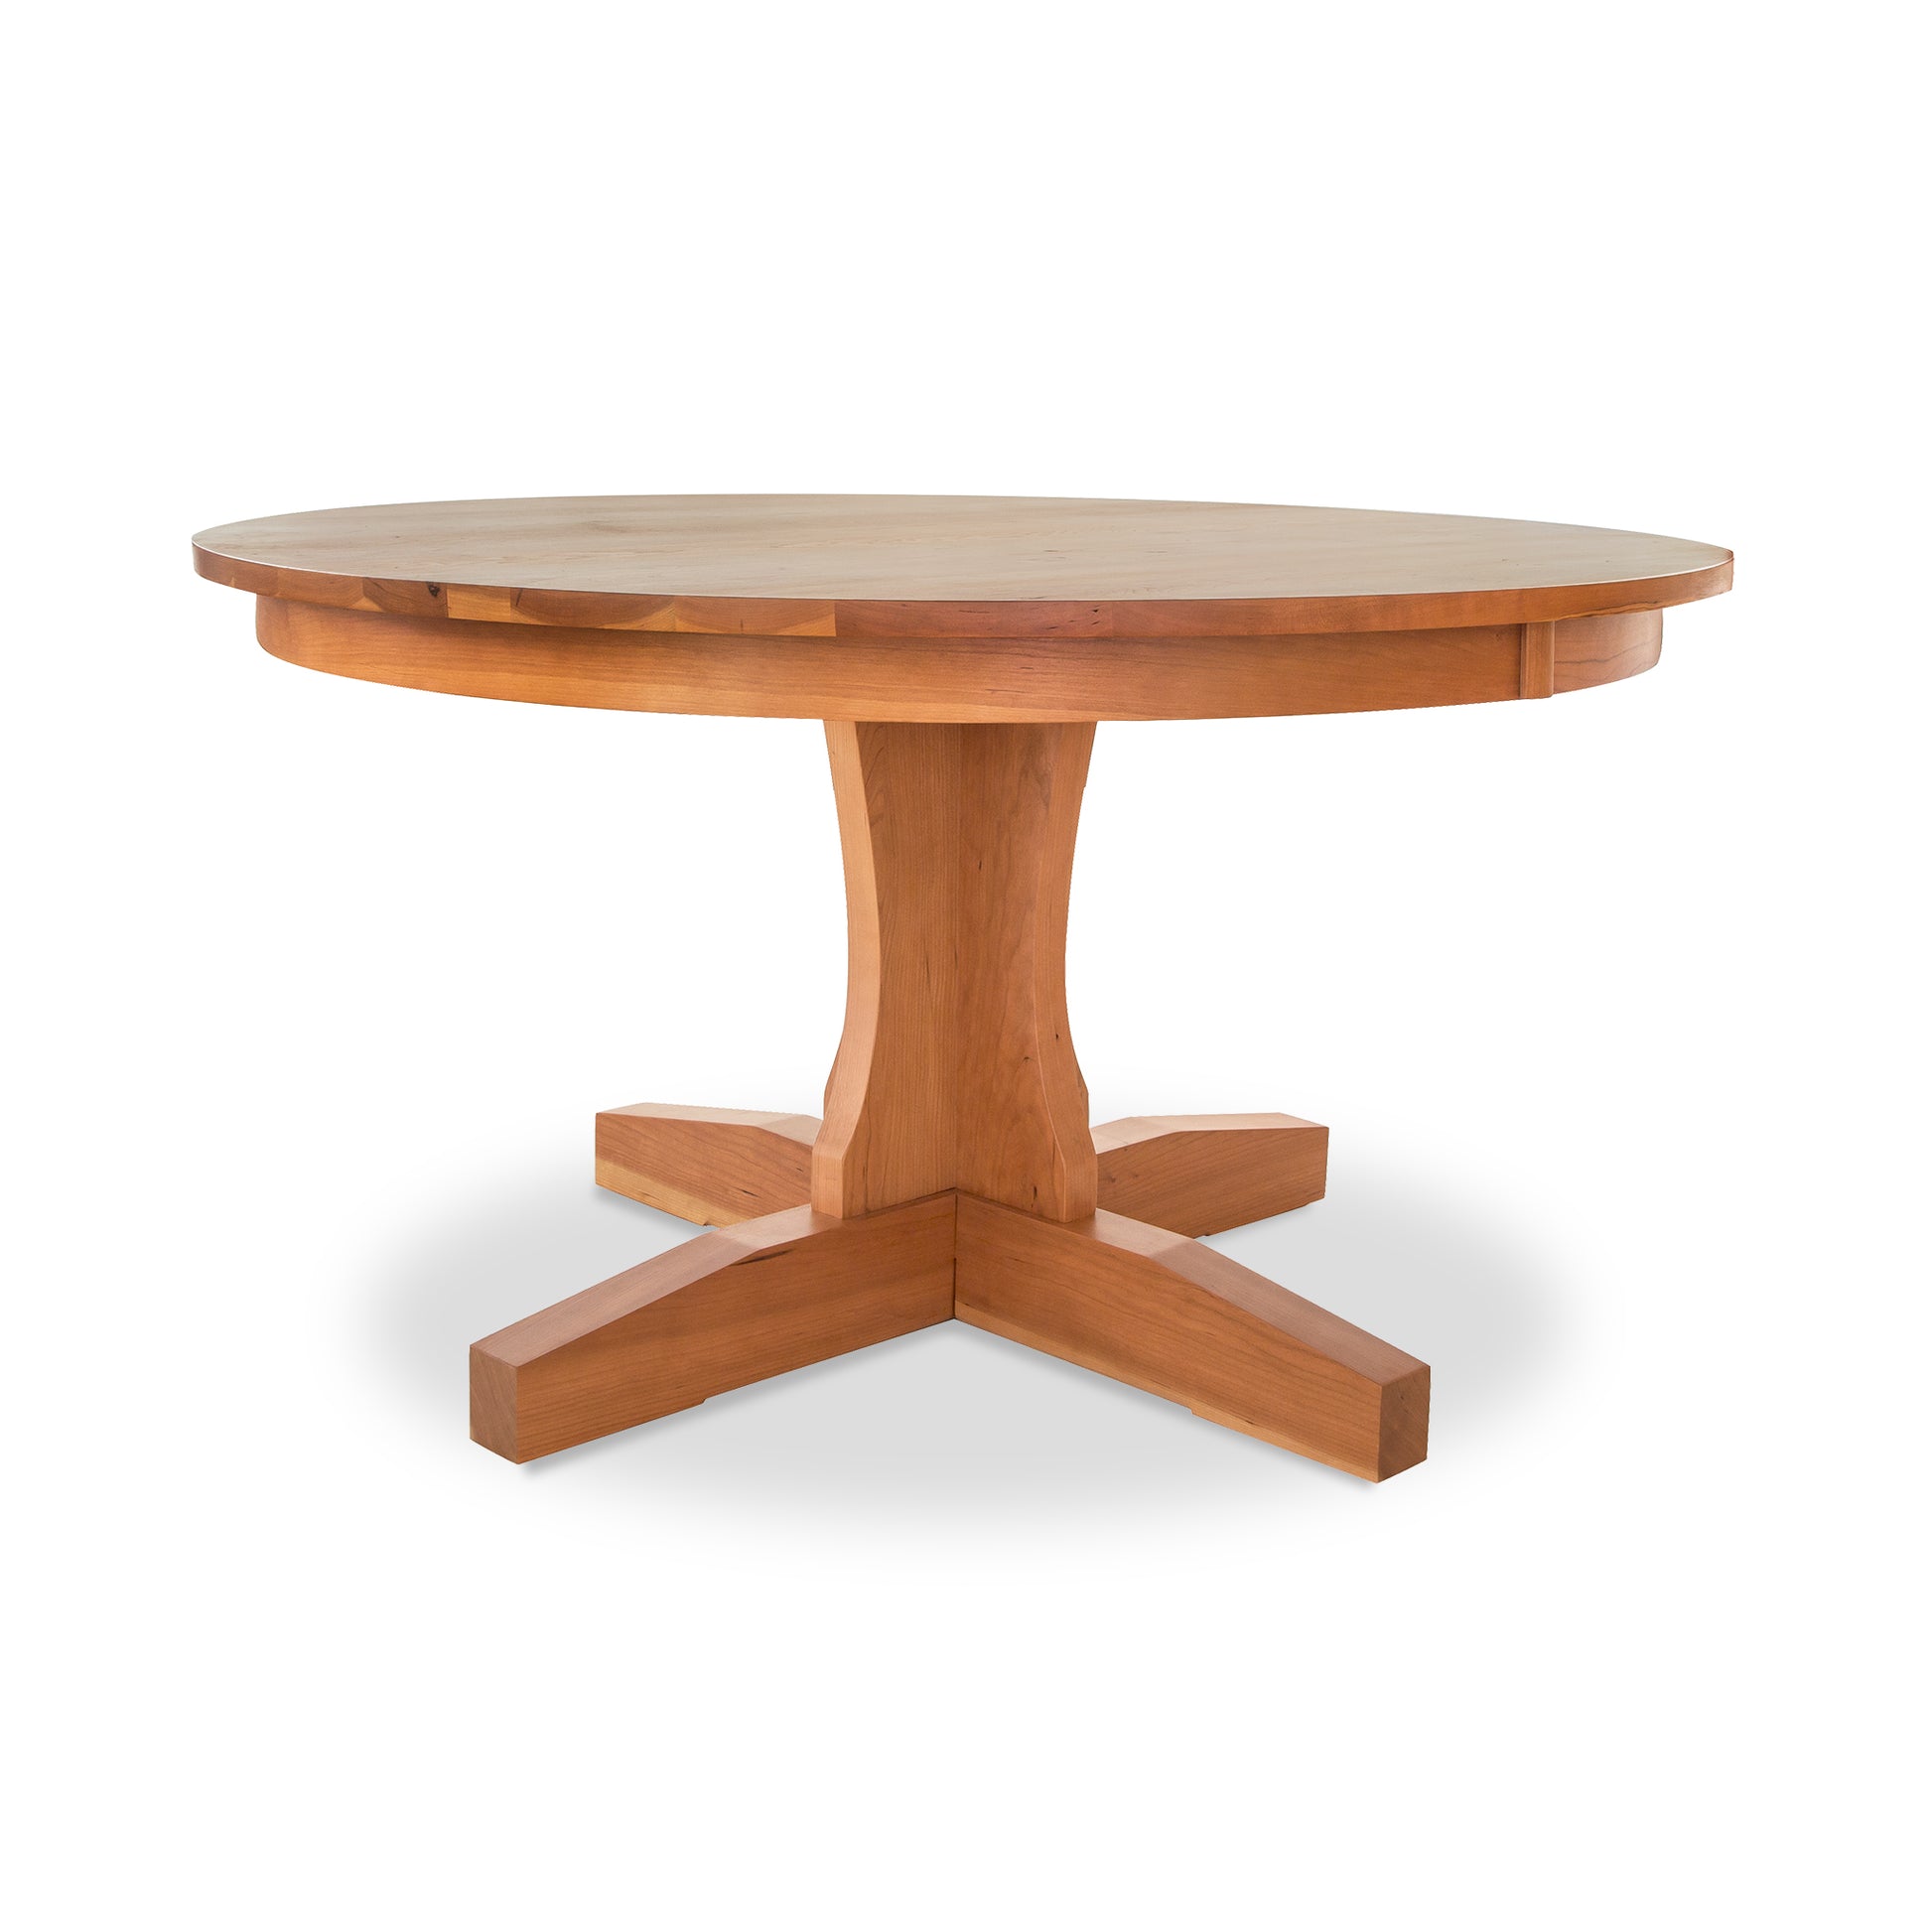 A New Traditions Round Pedestal Table by Lyndon Furniture, with a wooden base, crafted from hardwoods and finished with a natural finish.